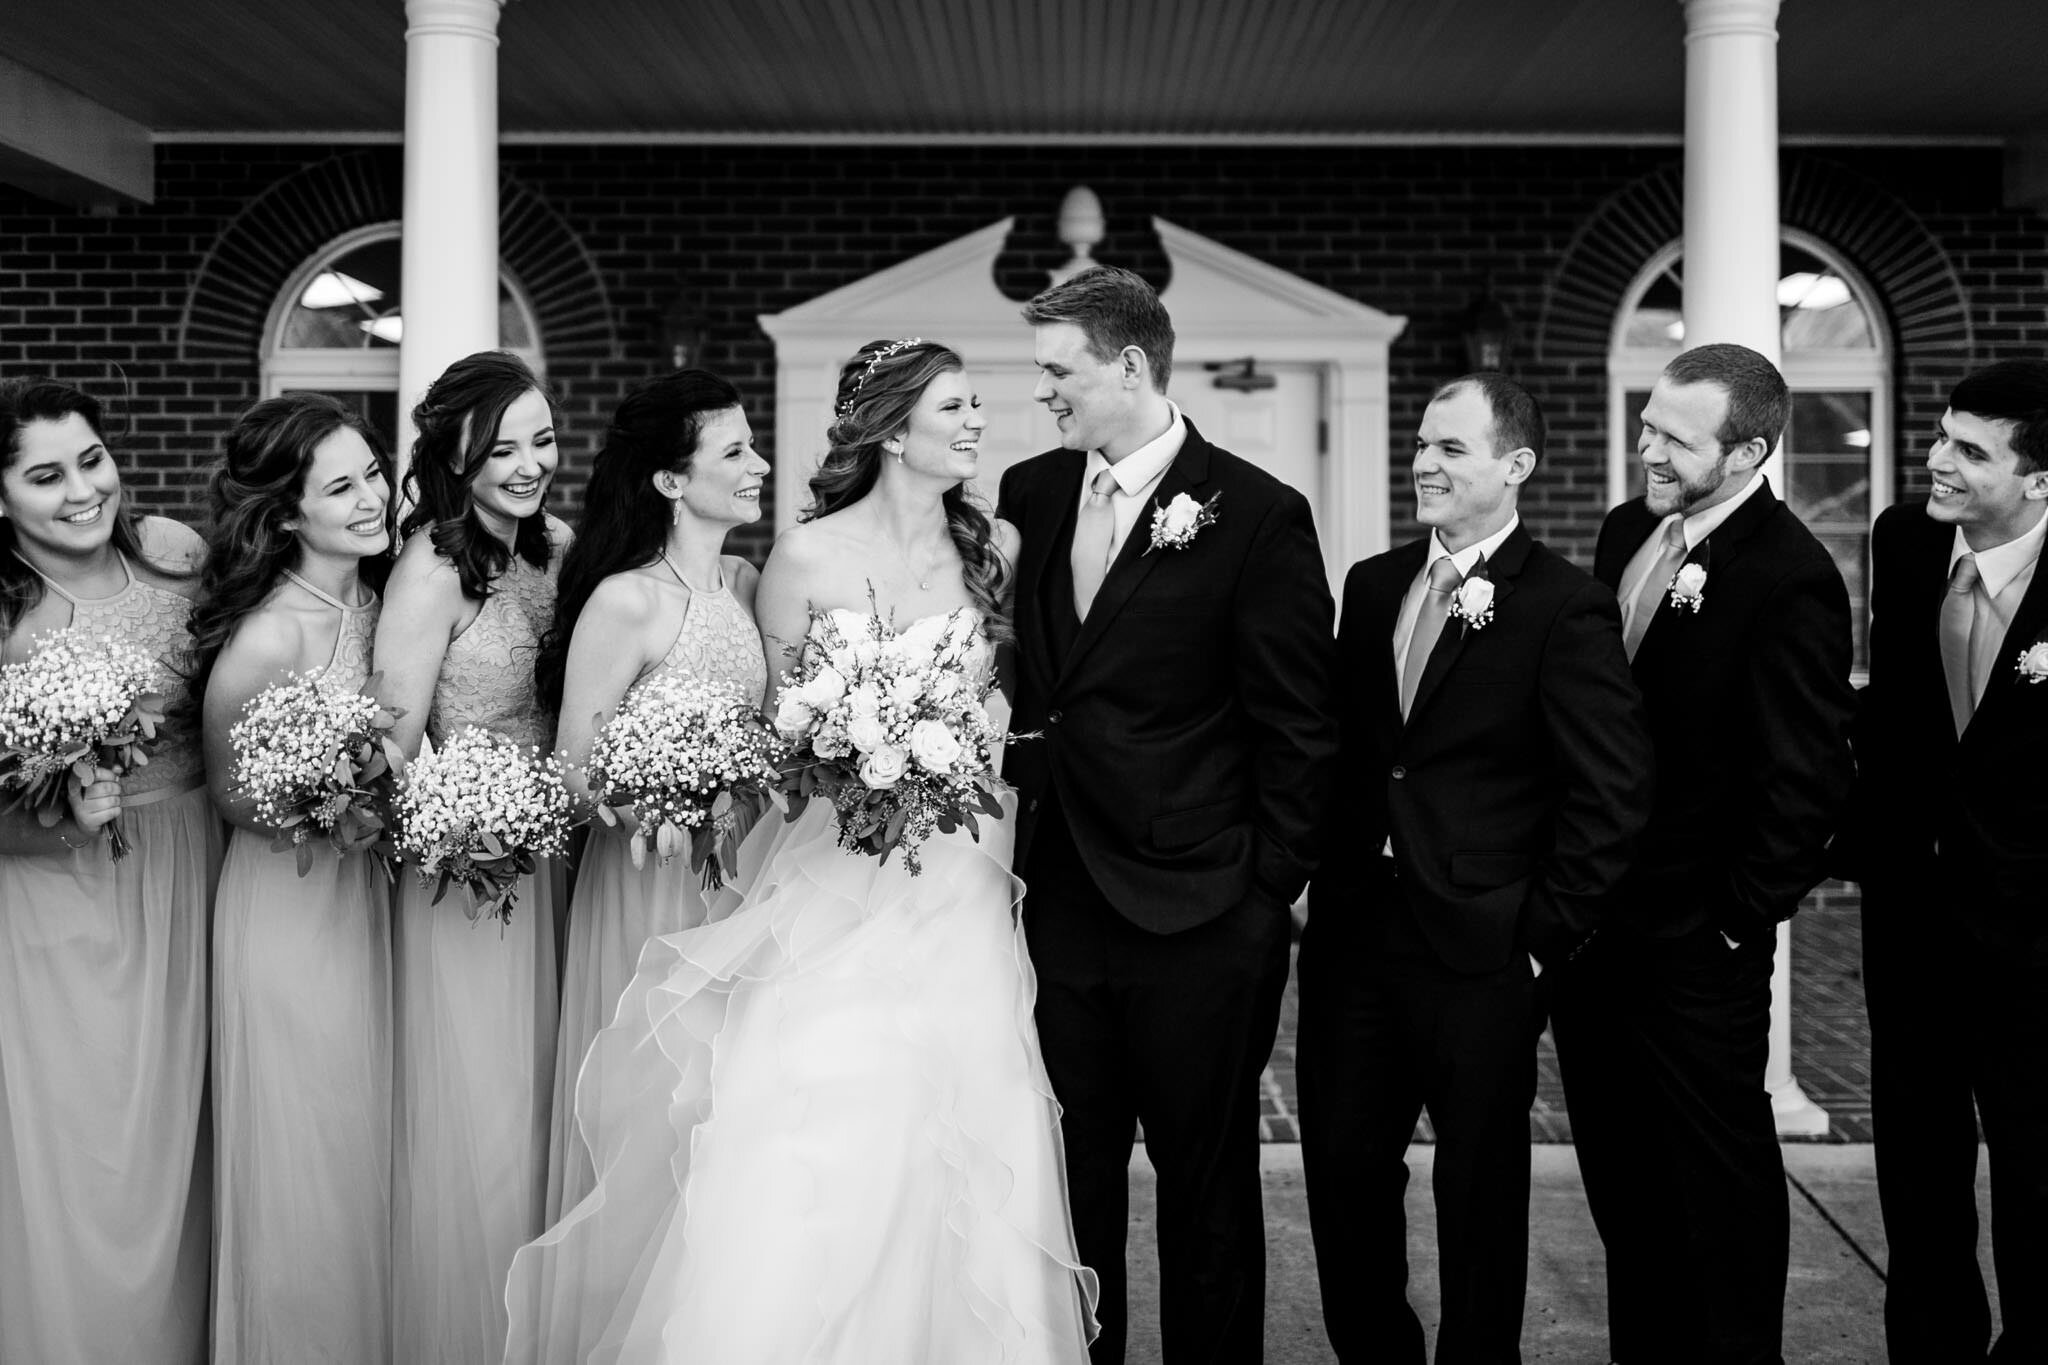 Durham Wedding Photographer | By G. Lin Photography | Black and white photo of wedding party laughing together